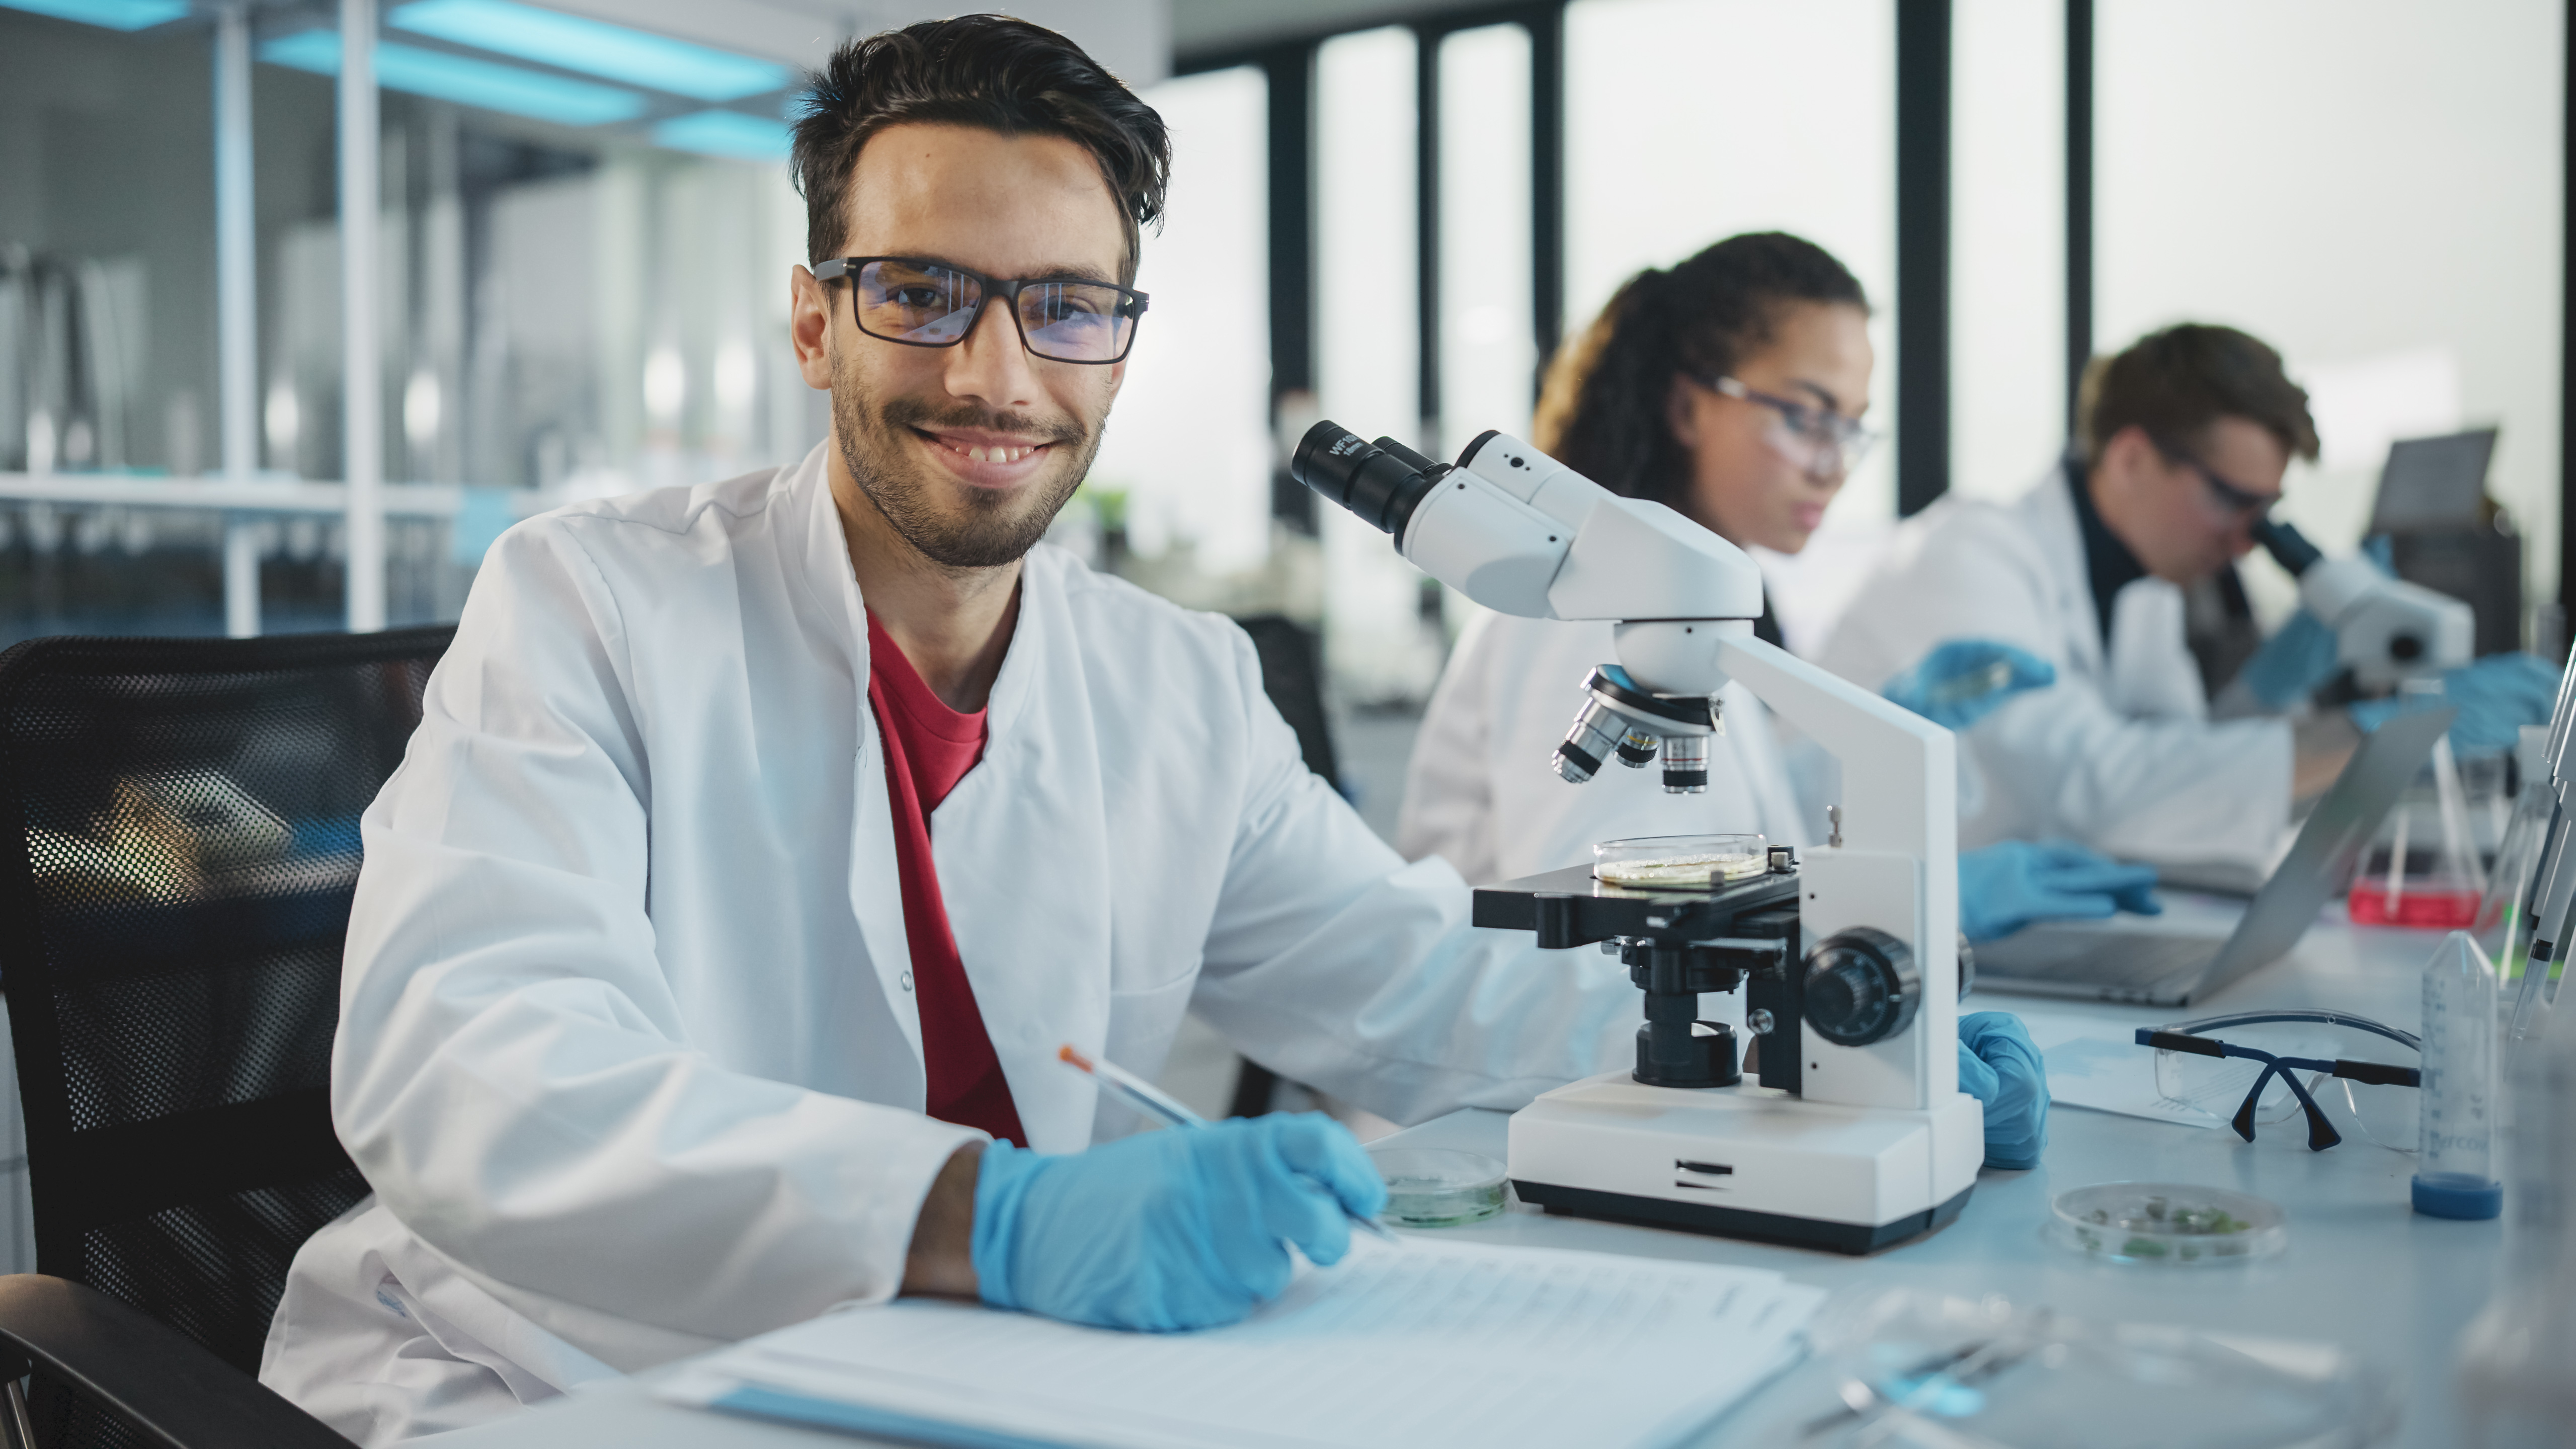 Scientist in lab analyzing samples with microscope, looking at camera and smiling